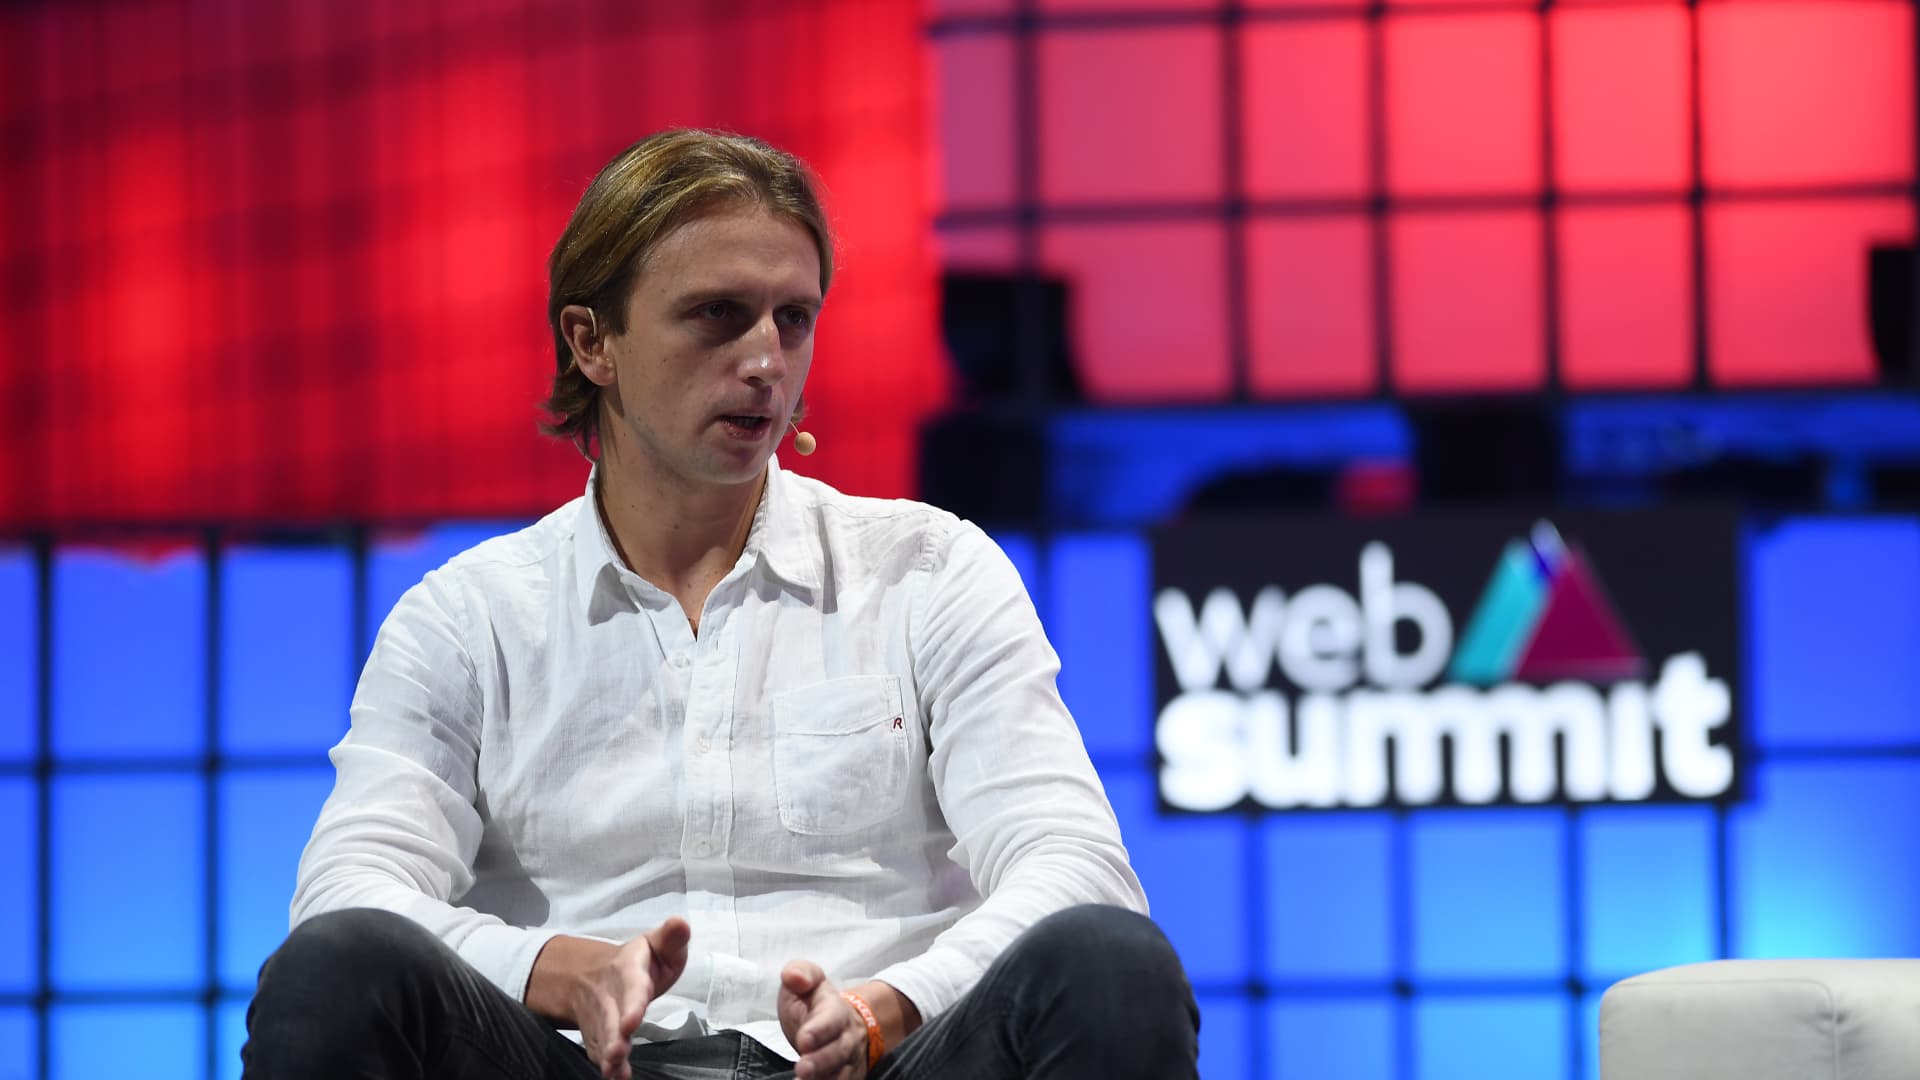 Rival fintechs Revolut and Wise are still recruiting